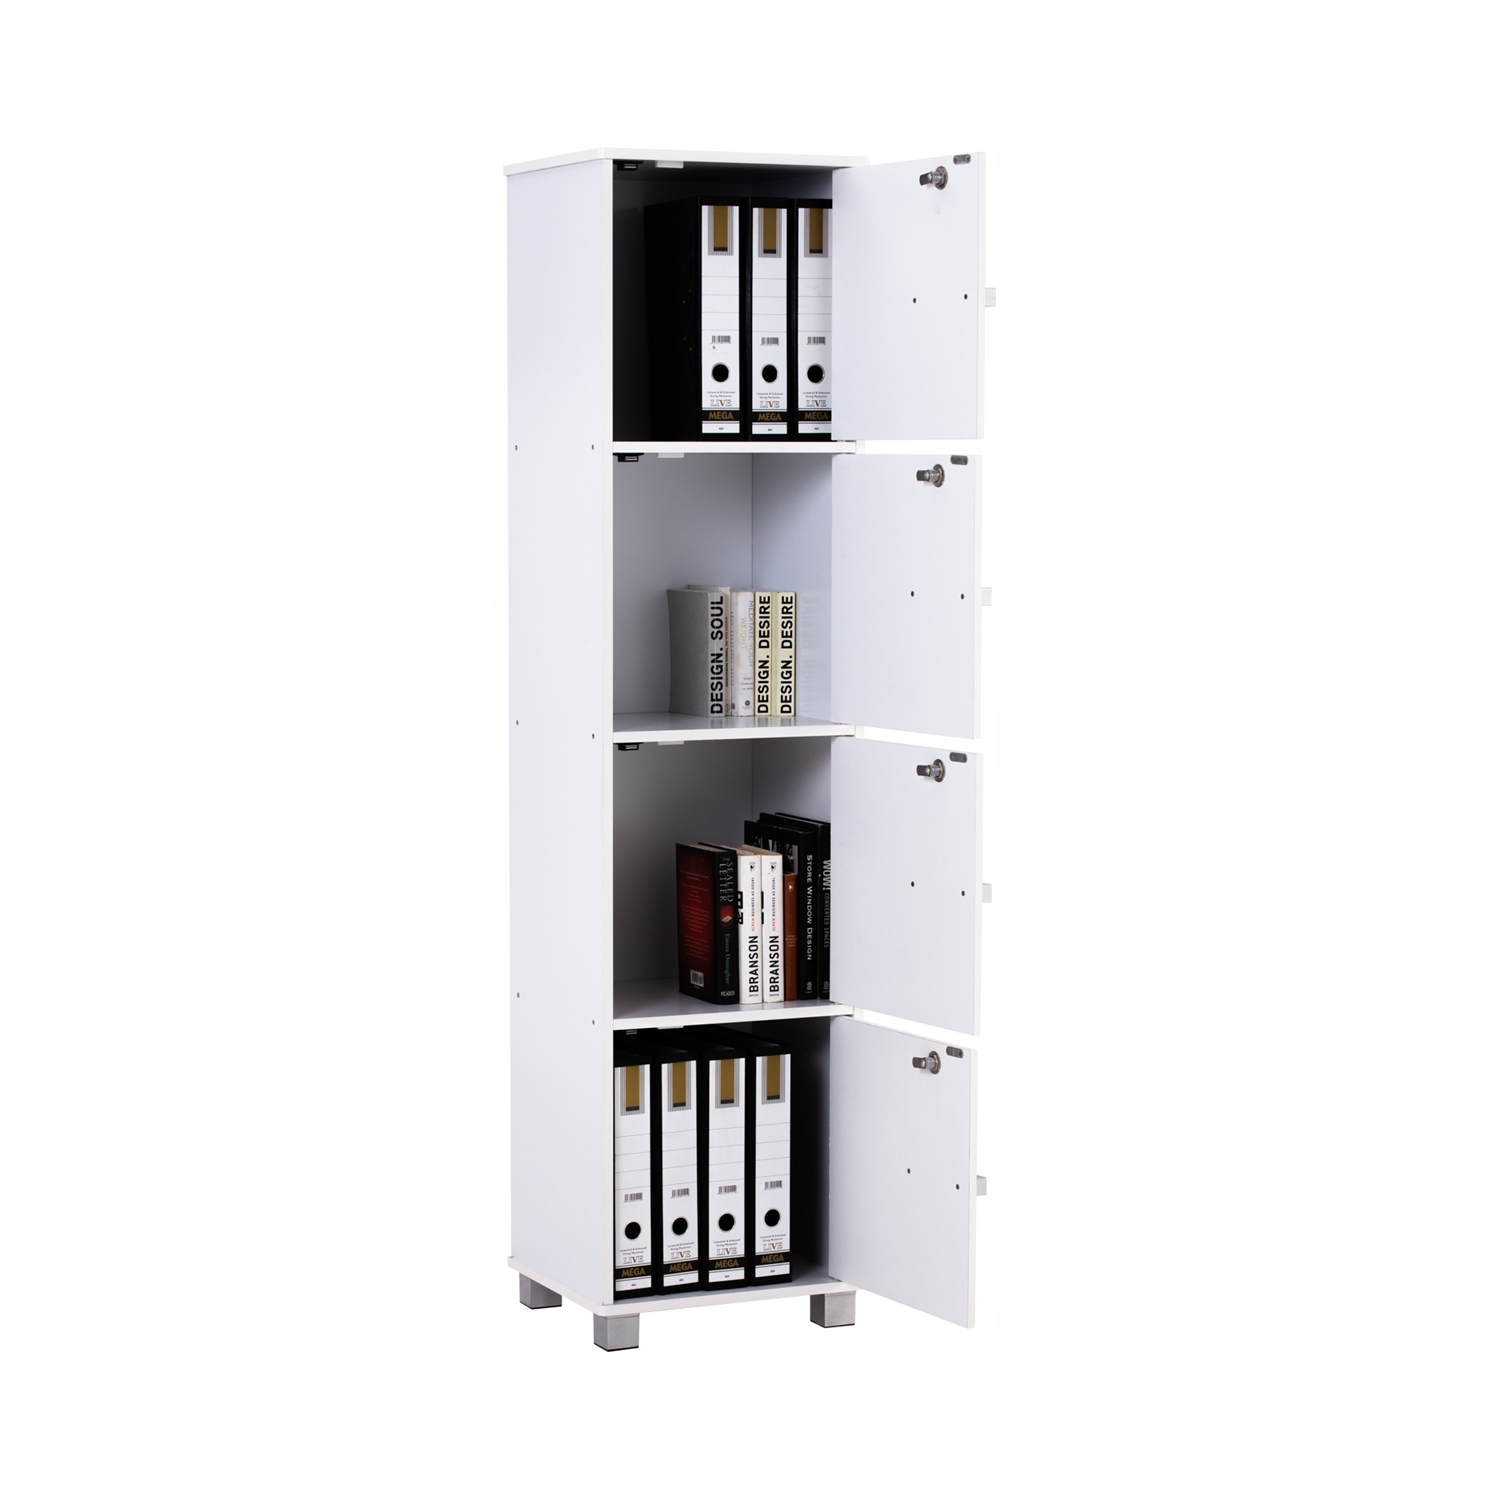 AIMIZON Oeumo High cabinet with 4 doors in White colour